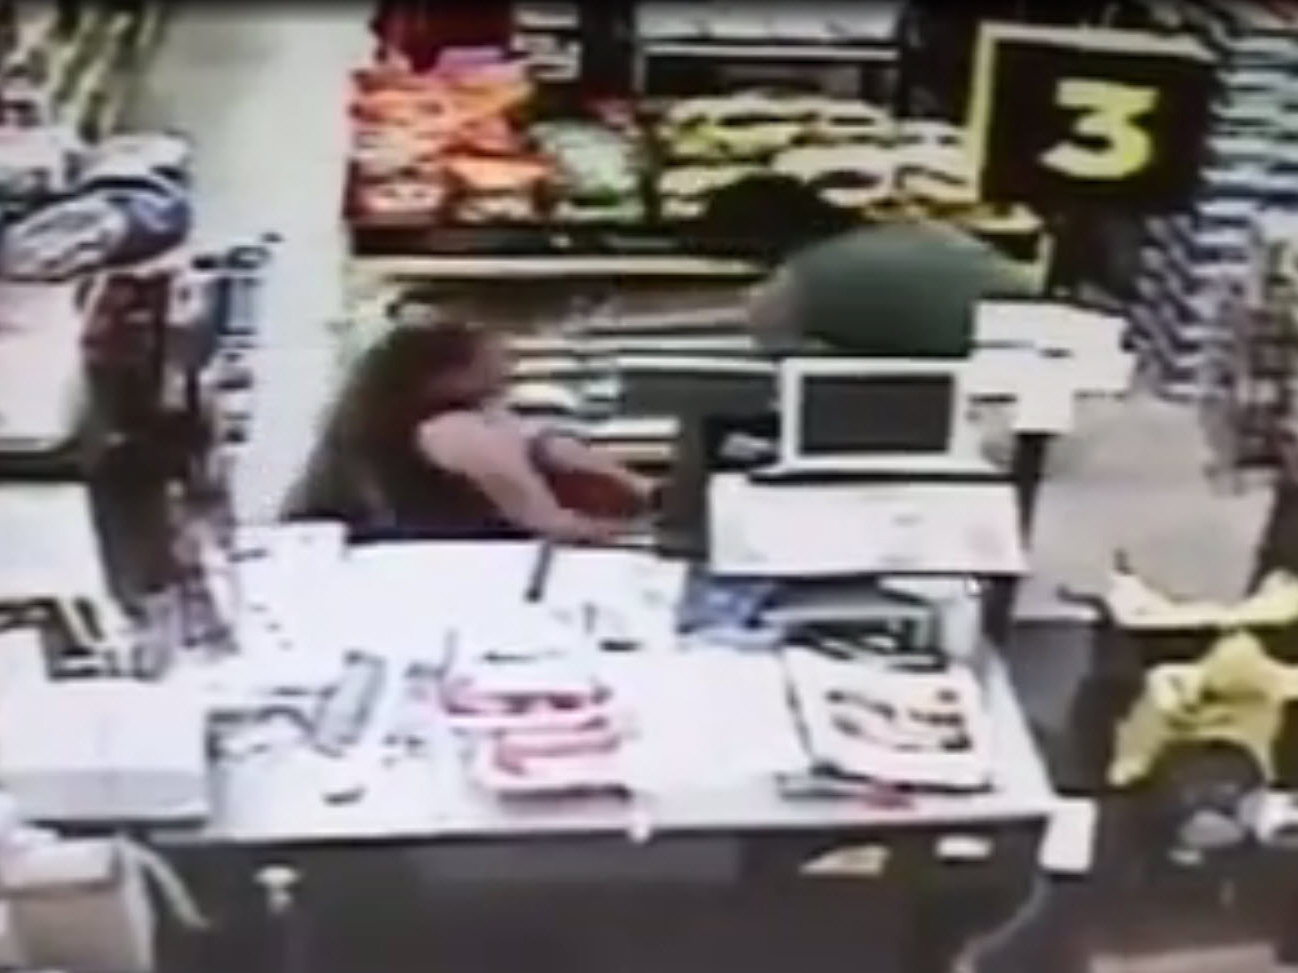 Moment mother stops kidnapping of 13-year-old girl caught on CCTV